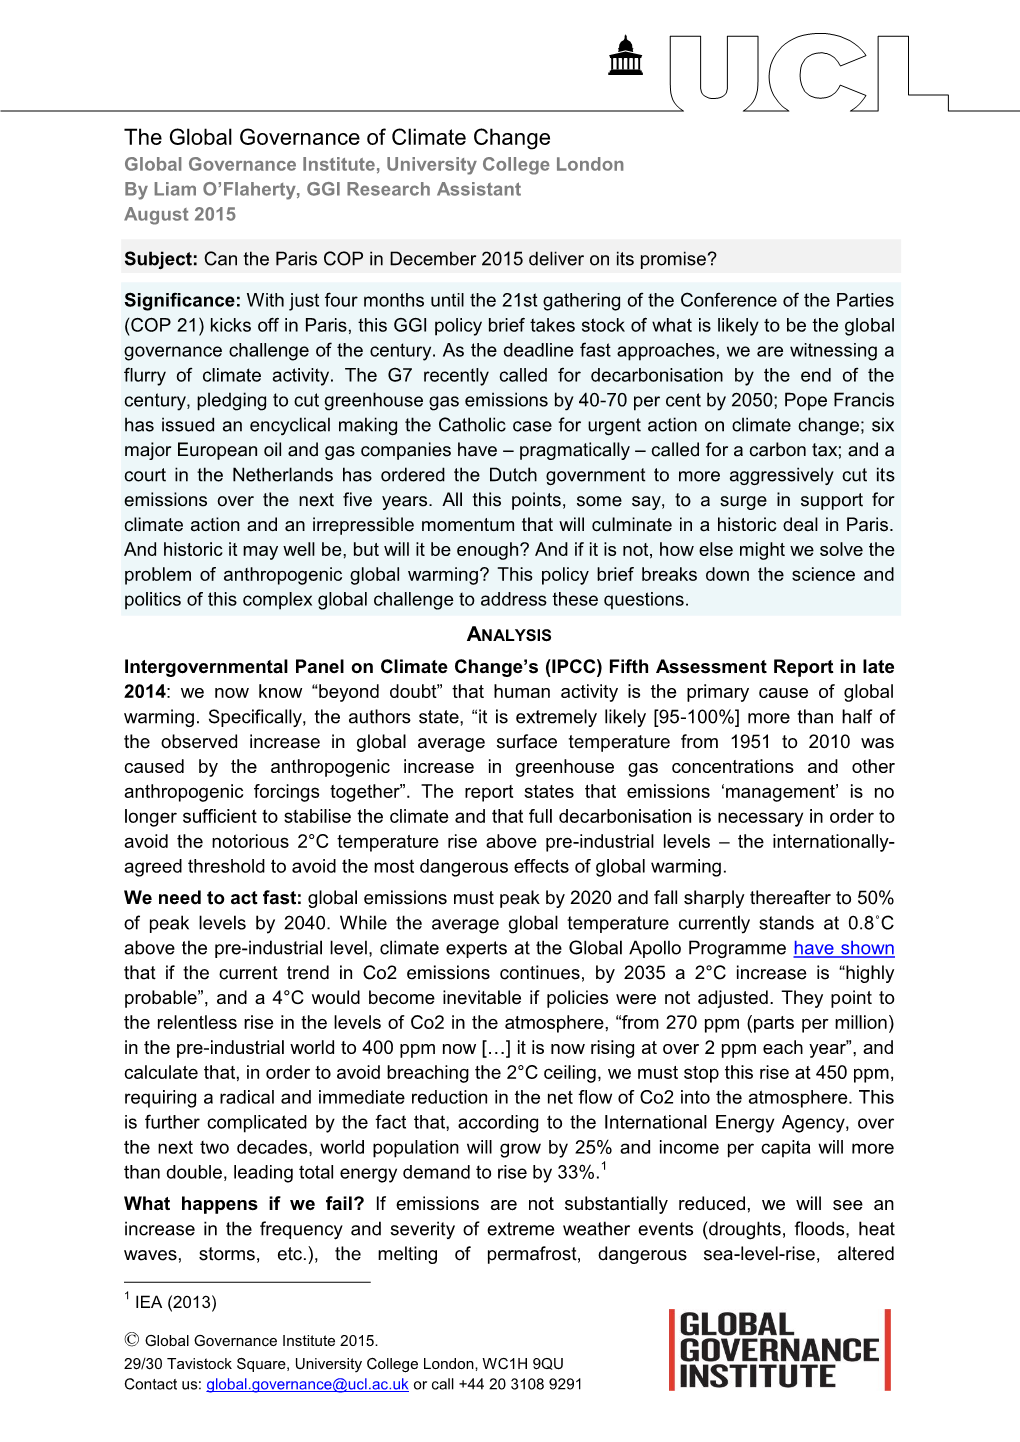 The Global Governance of Climate Change Global Governance Institute, University College London by Liam O’Flaherty, GGI Research Assistant August 2015